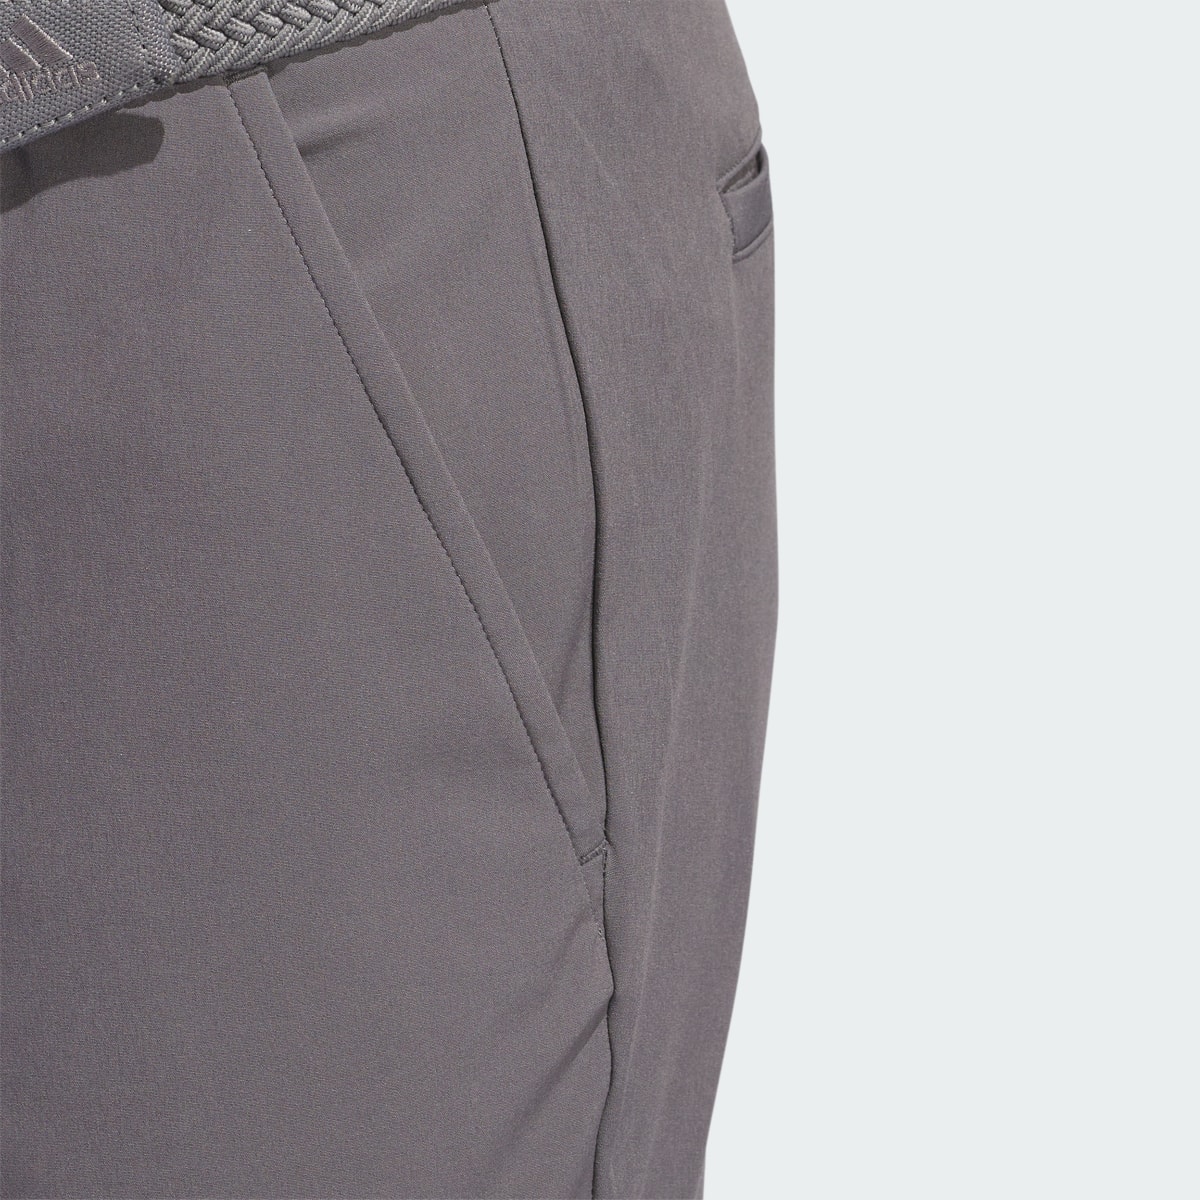 Adidas Ultimate365 Tapered Golf Trousers. 6